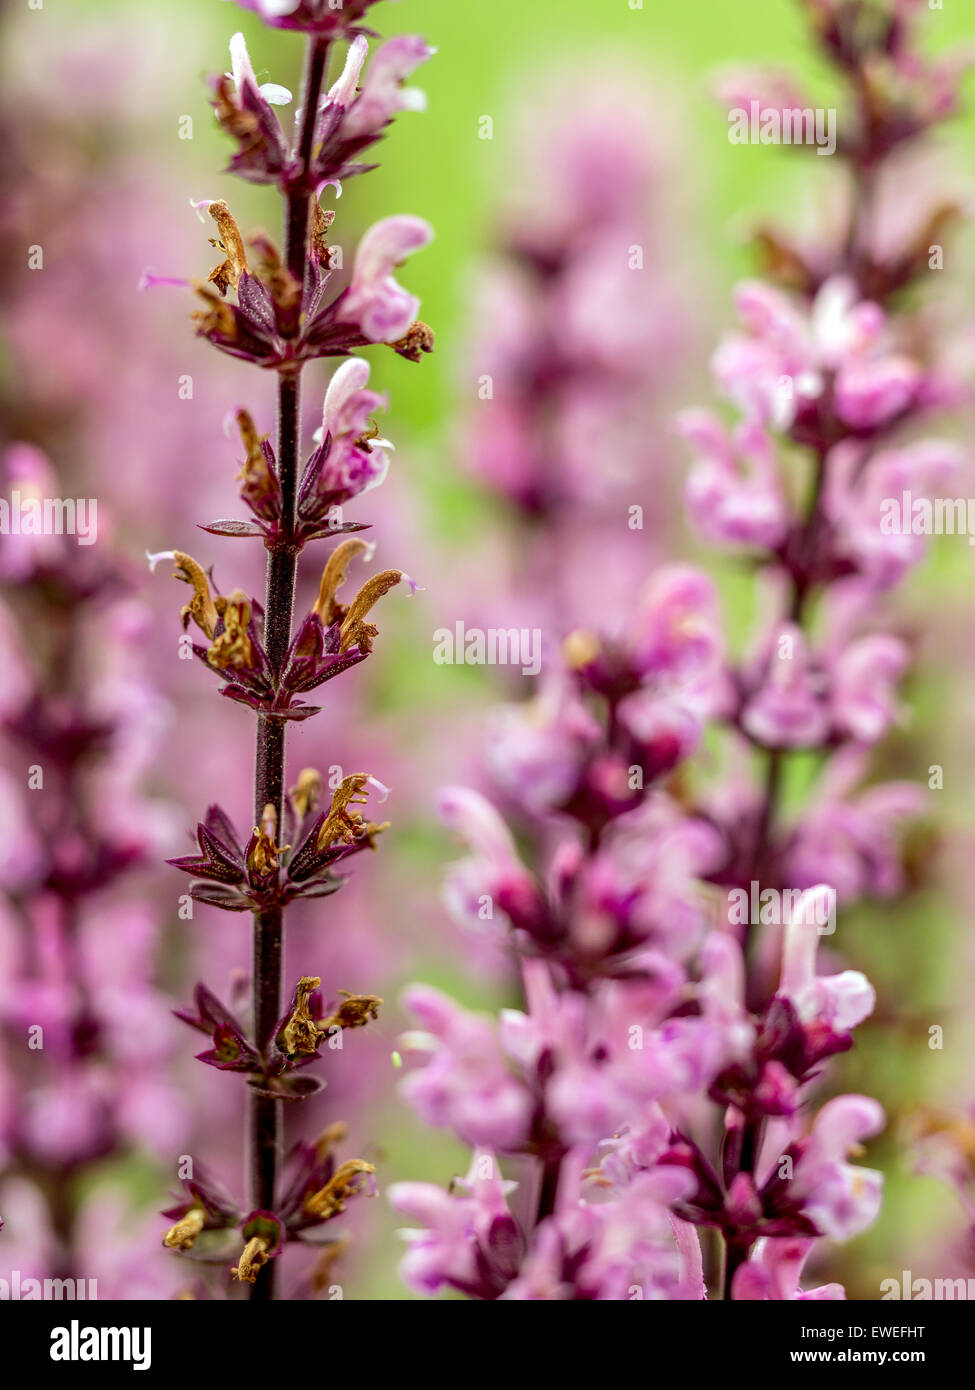 Closeup of salvia flowers in blossom Stock Photo